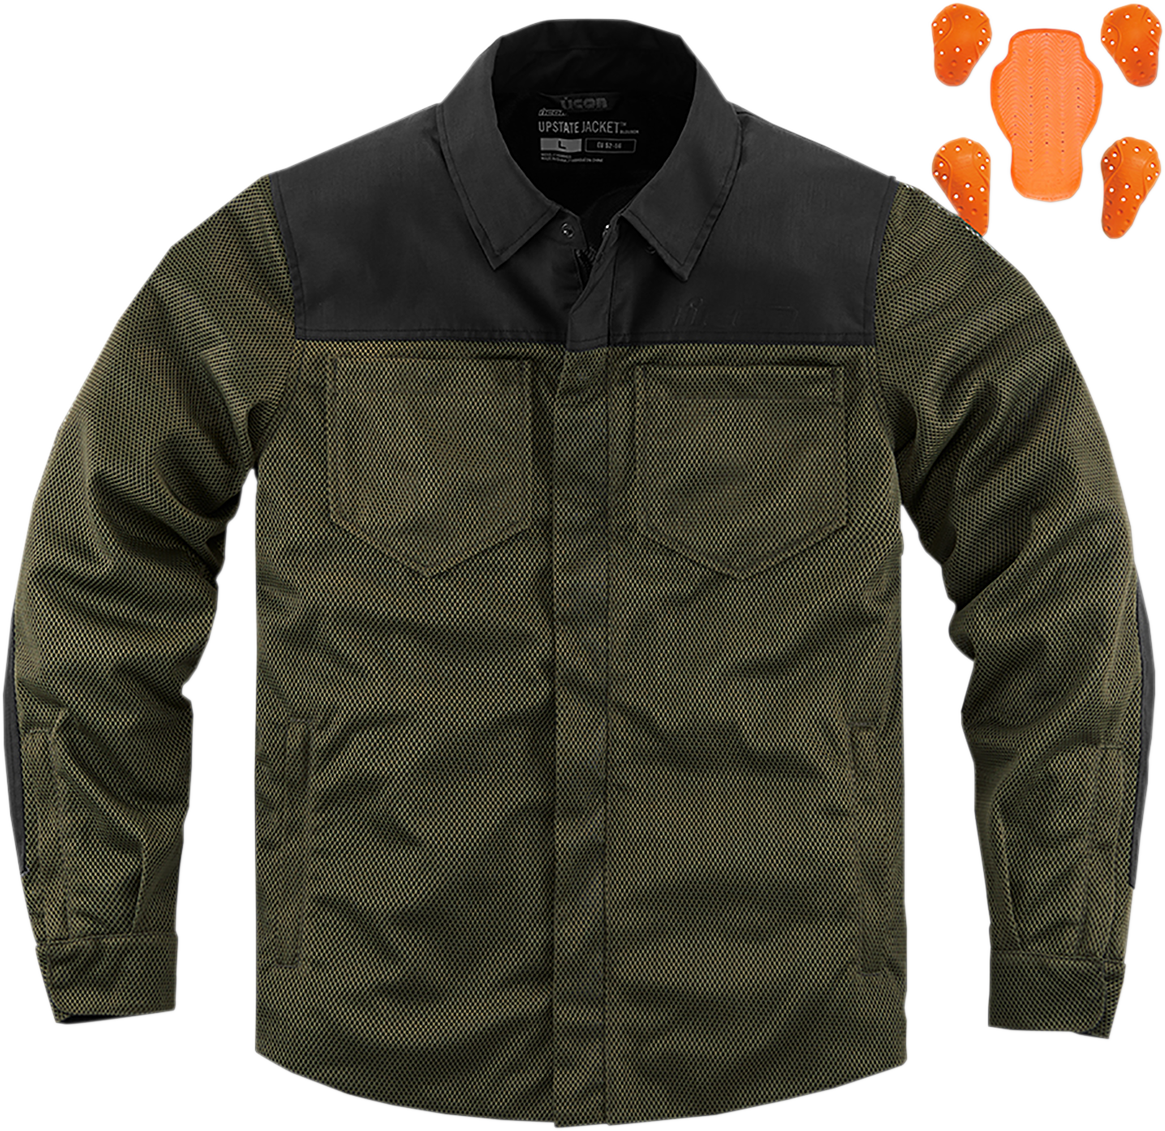 ICON Upstate Riding Shirt - Olive - Small 2820-5341